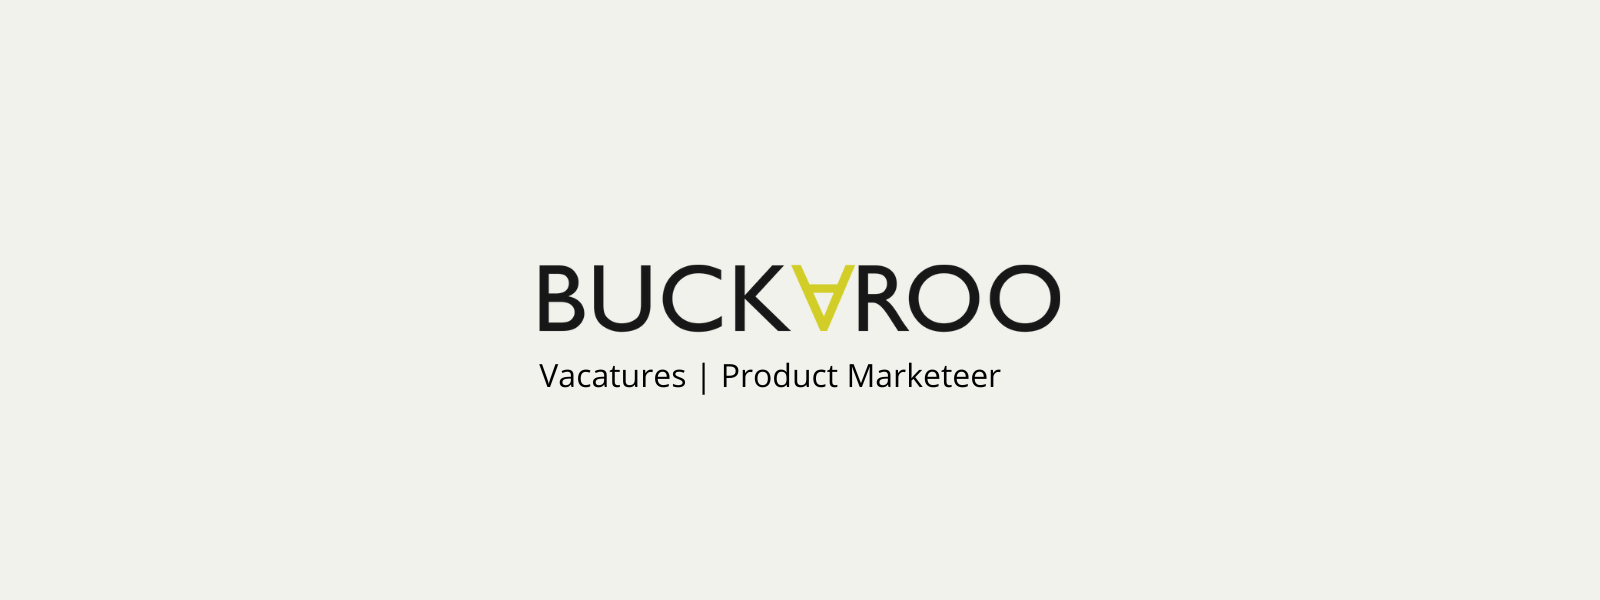 Product Marketeer